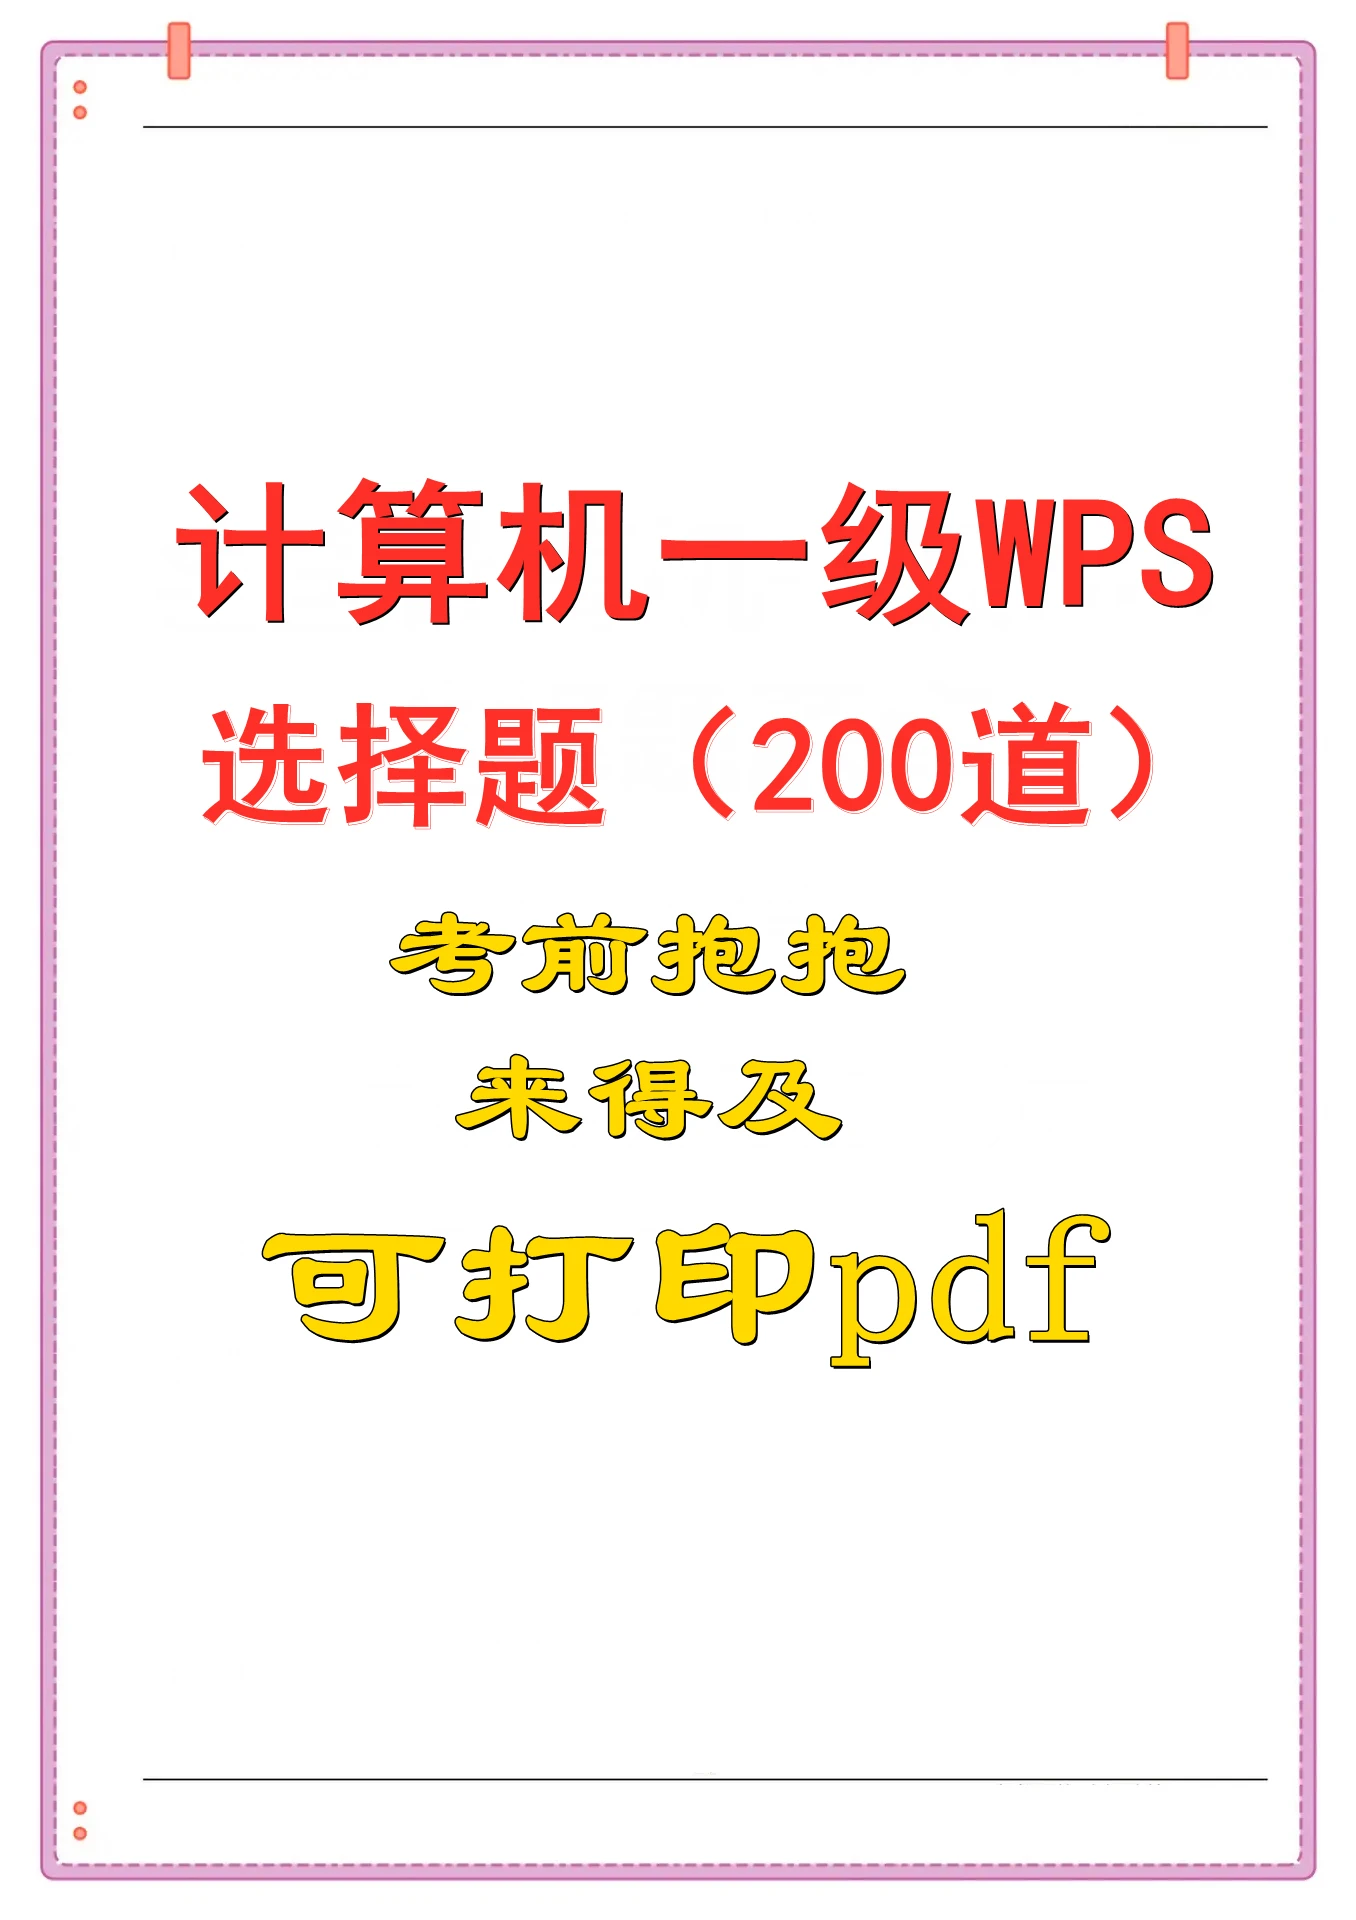 WPS Office 个人版 - Official app in the Microsoft Store